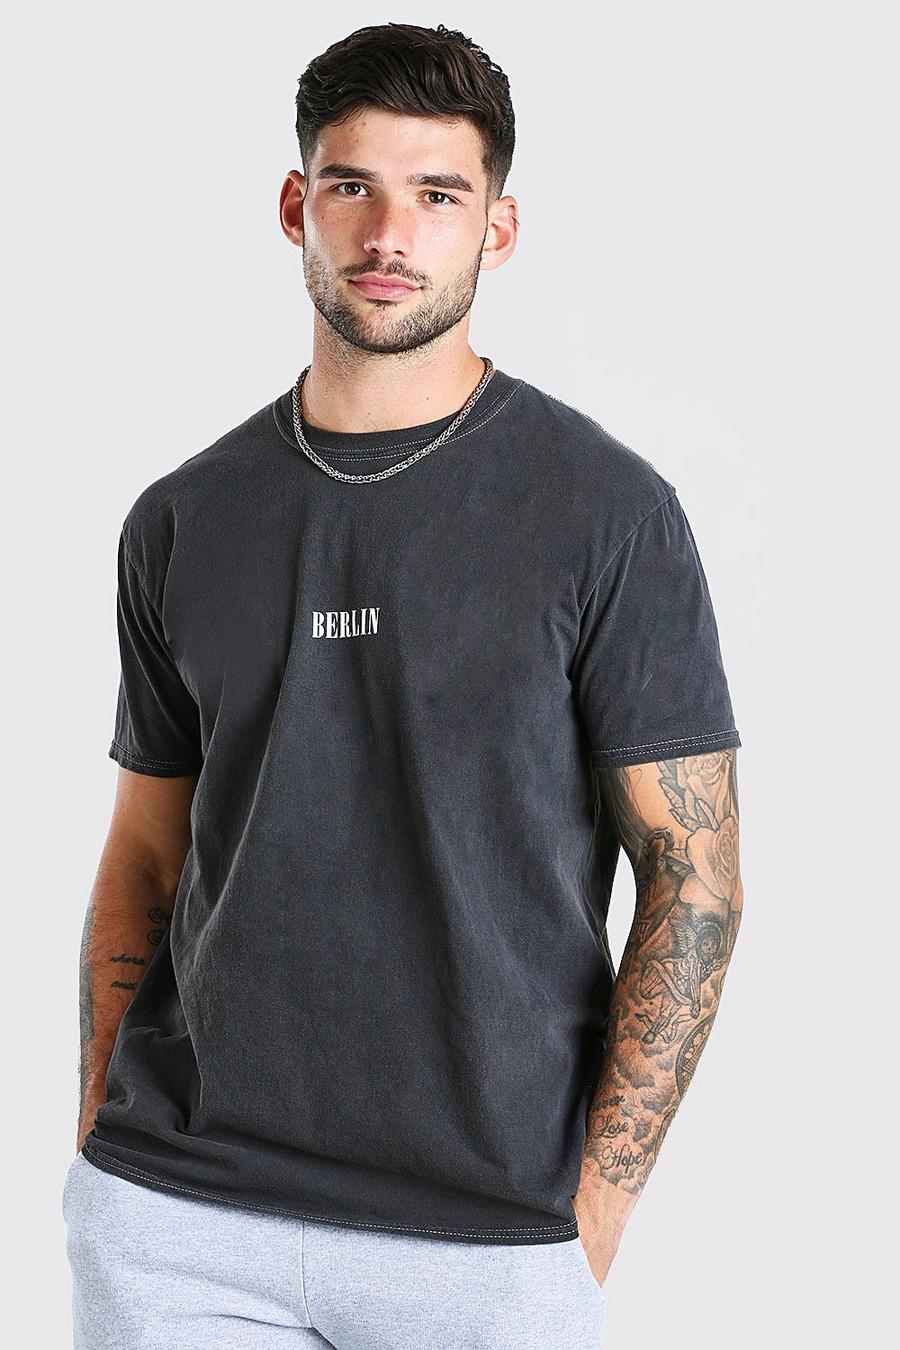 Charcoal Oversized Berlin Print Overdyed T-Shirt image number 1